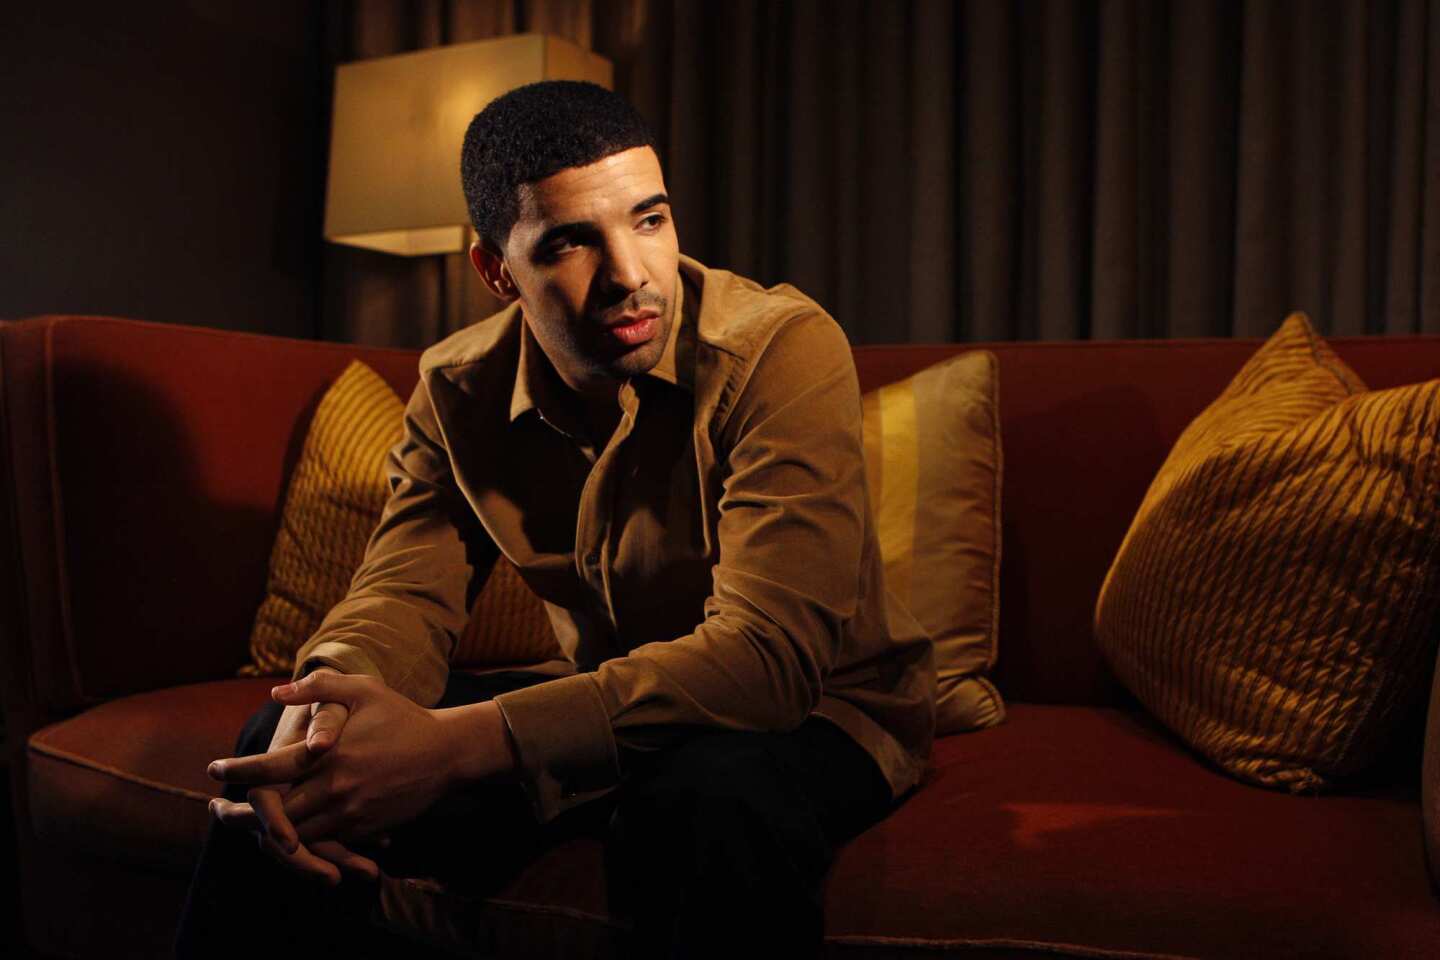 To discuss Drake requires a mention of how he represents the softer side of hip-hop. It's not just anyone, after all, who gets a guest harmonica turn from Stevie Wonder. His gorgeously pensive solo ends "Doing It Wrong," a stand-out R&B cut in which Drake is nearly too nervous to end a relationship.The template on Drake's chart-topping 2011 album "Take Care," and for essentially the entirety of Drake's young career, is Kanye West's "808s & Heartbreak." Drake shares West's love for mood and never-ending existential analysis (80 minutes of it, to be precise). "Marvin's Room" showcases Drake's talents for both: he recounts how his sexual conquests are destroying his love life, sounding lost in murky, synthesized soul.Now if he'll just stop complaining about his taxes.